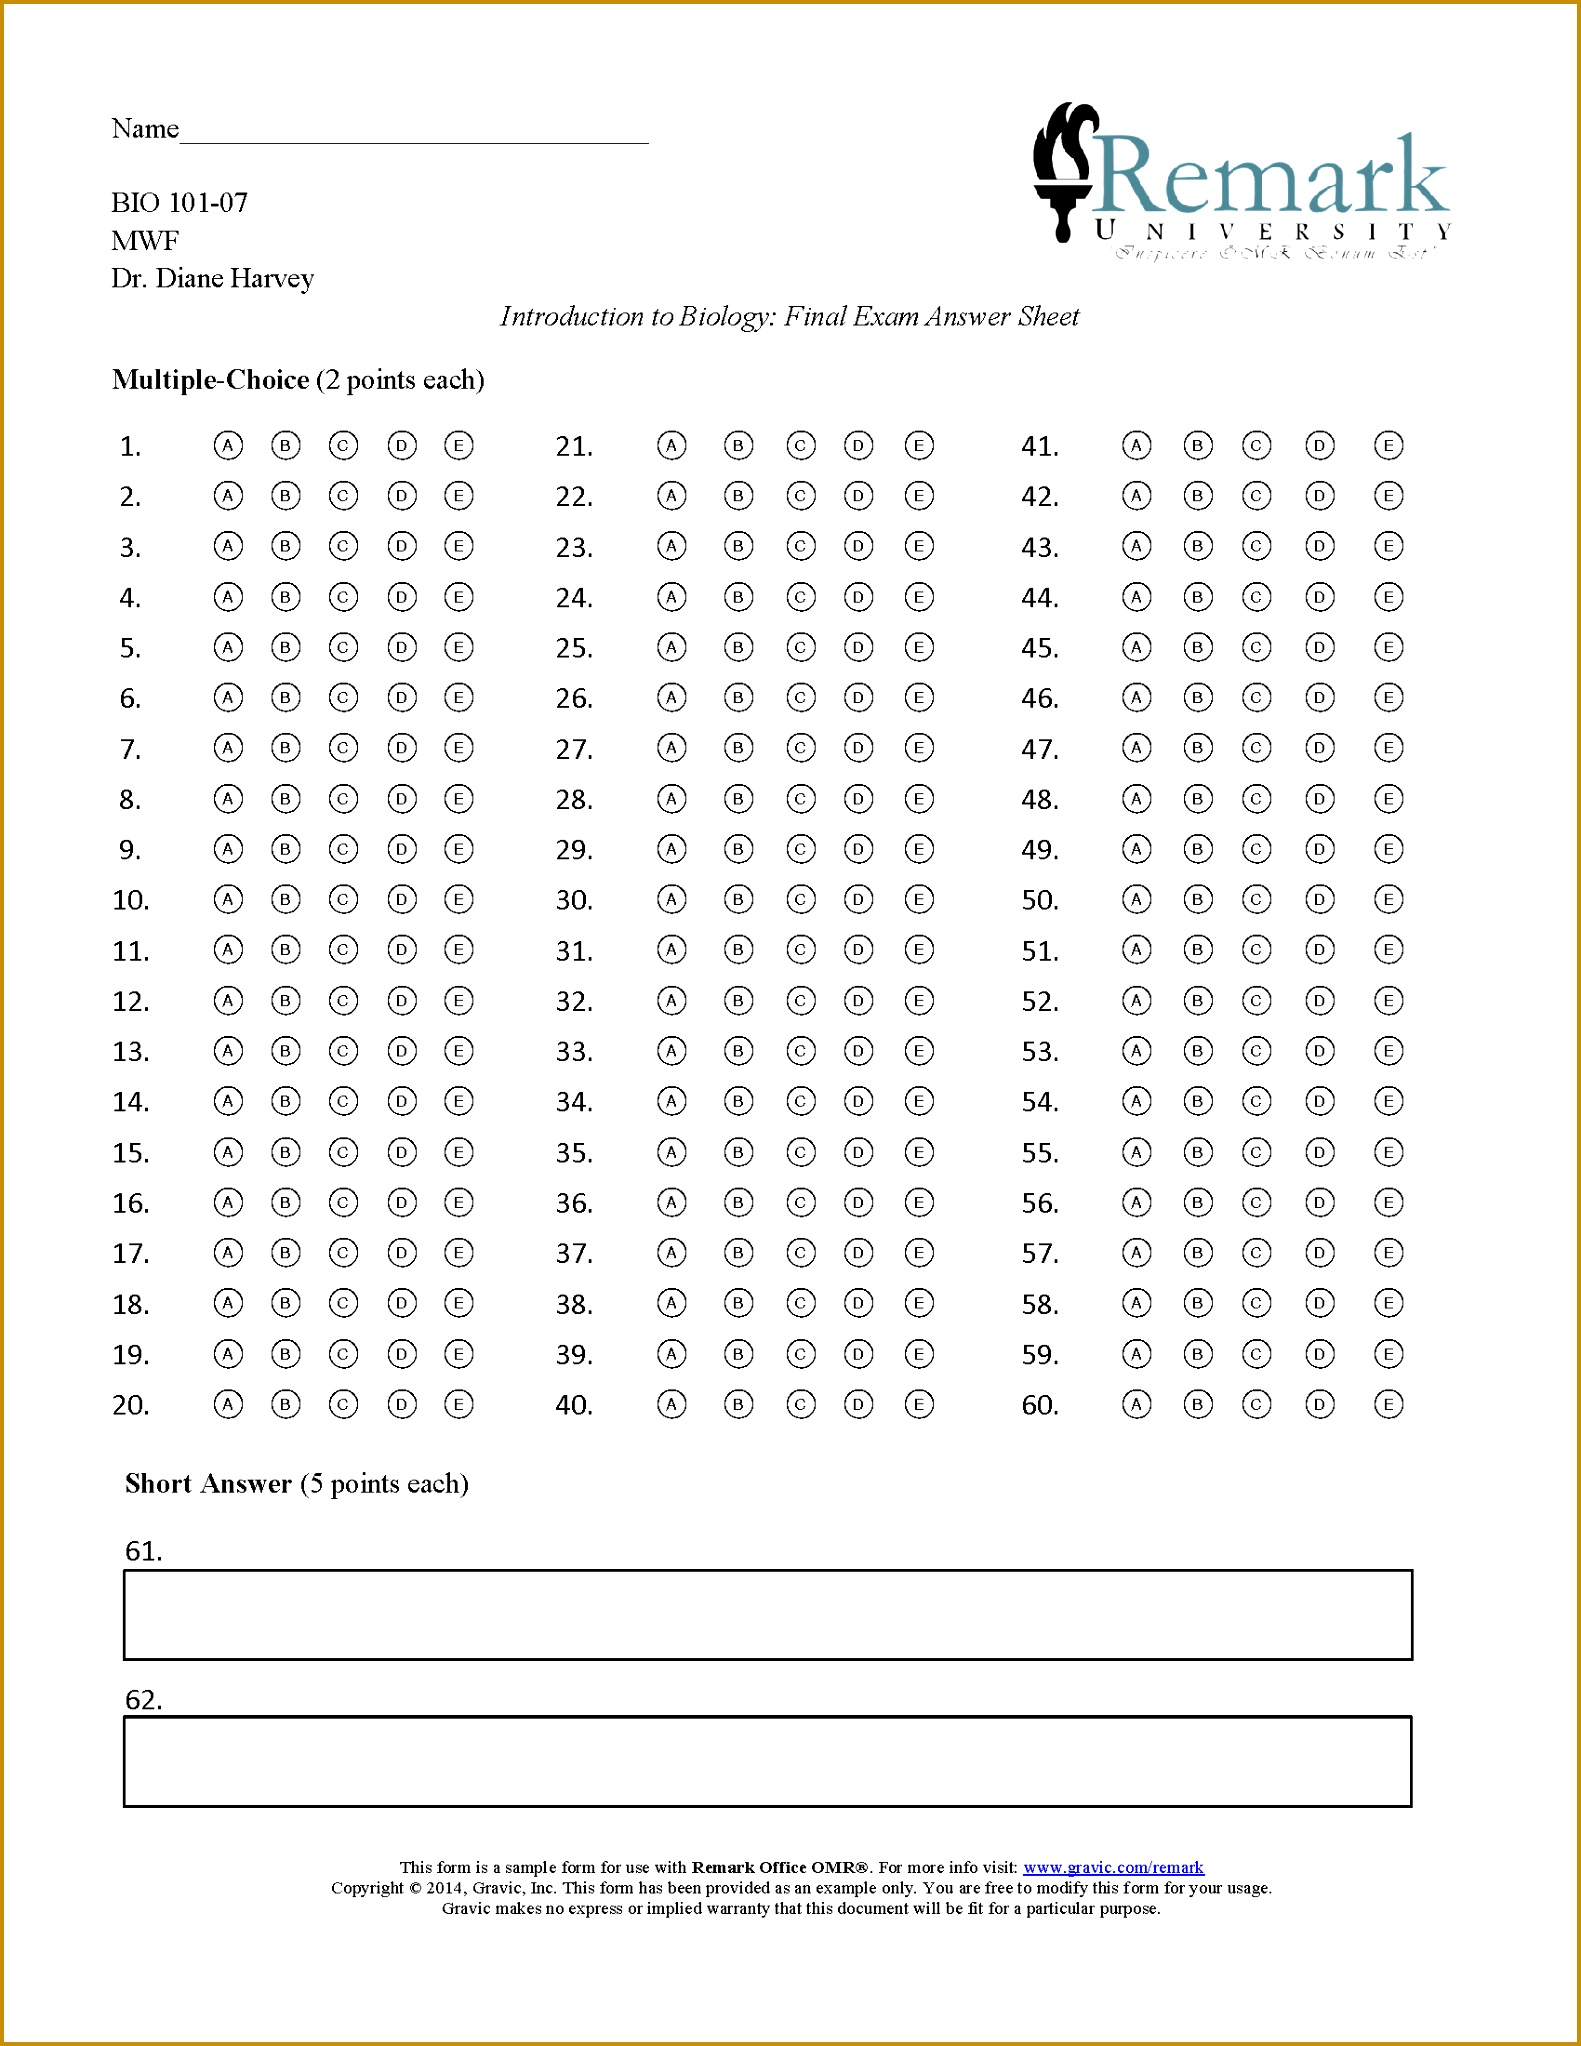 62 Question Test Answer Sheet for Remark fice OMR 20461581